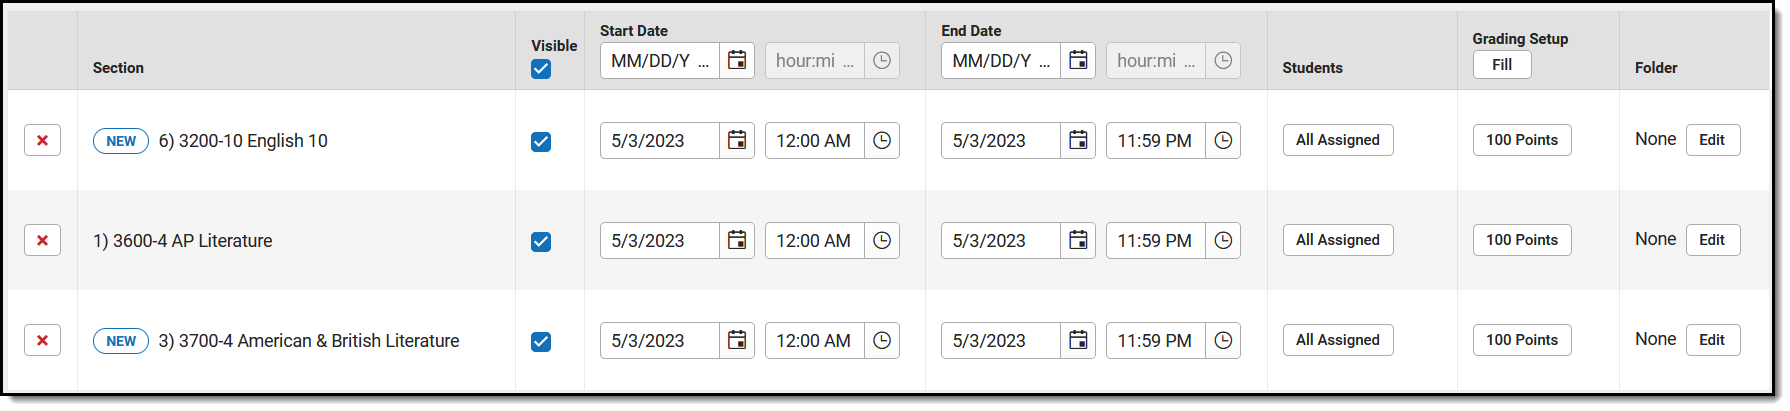 Screenshot of the grid of sections in the section selector, with assignment details editable.